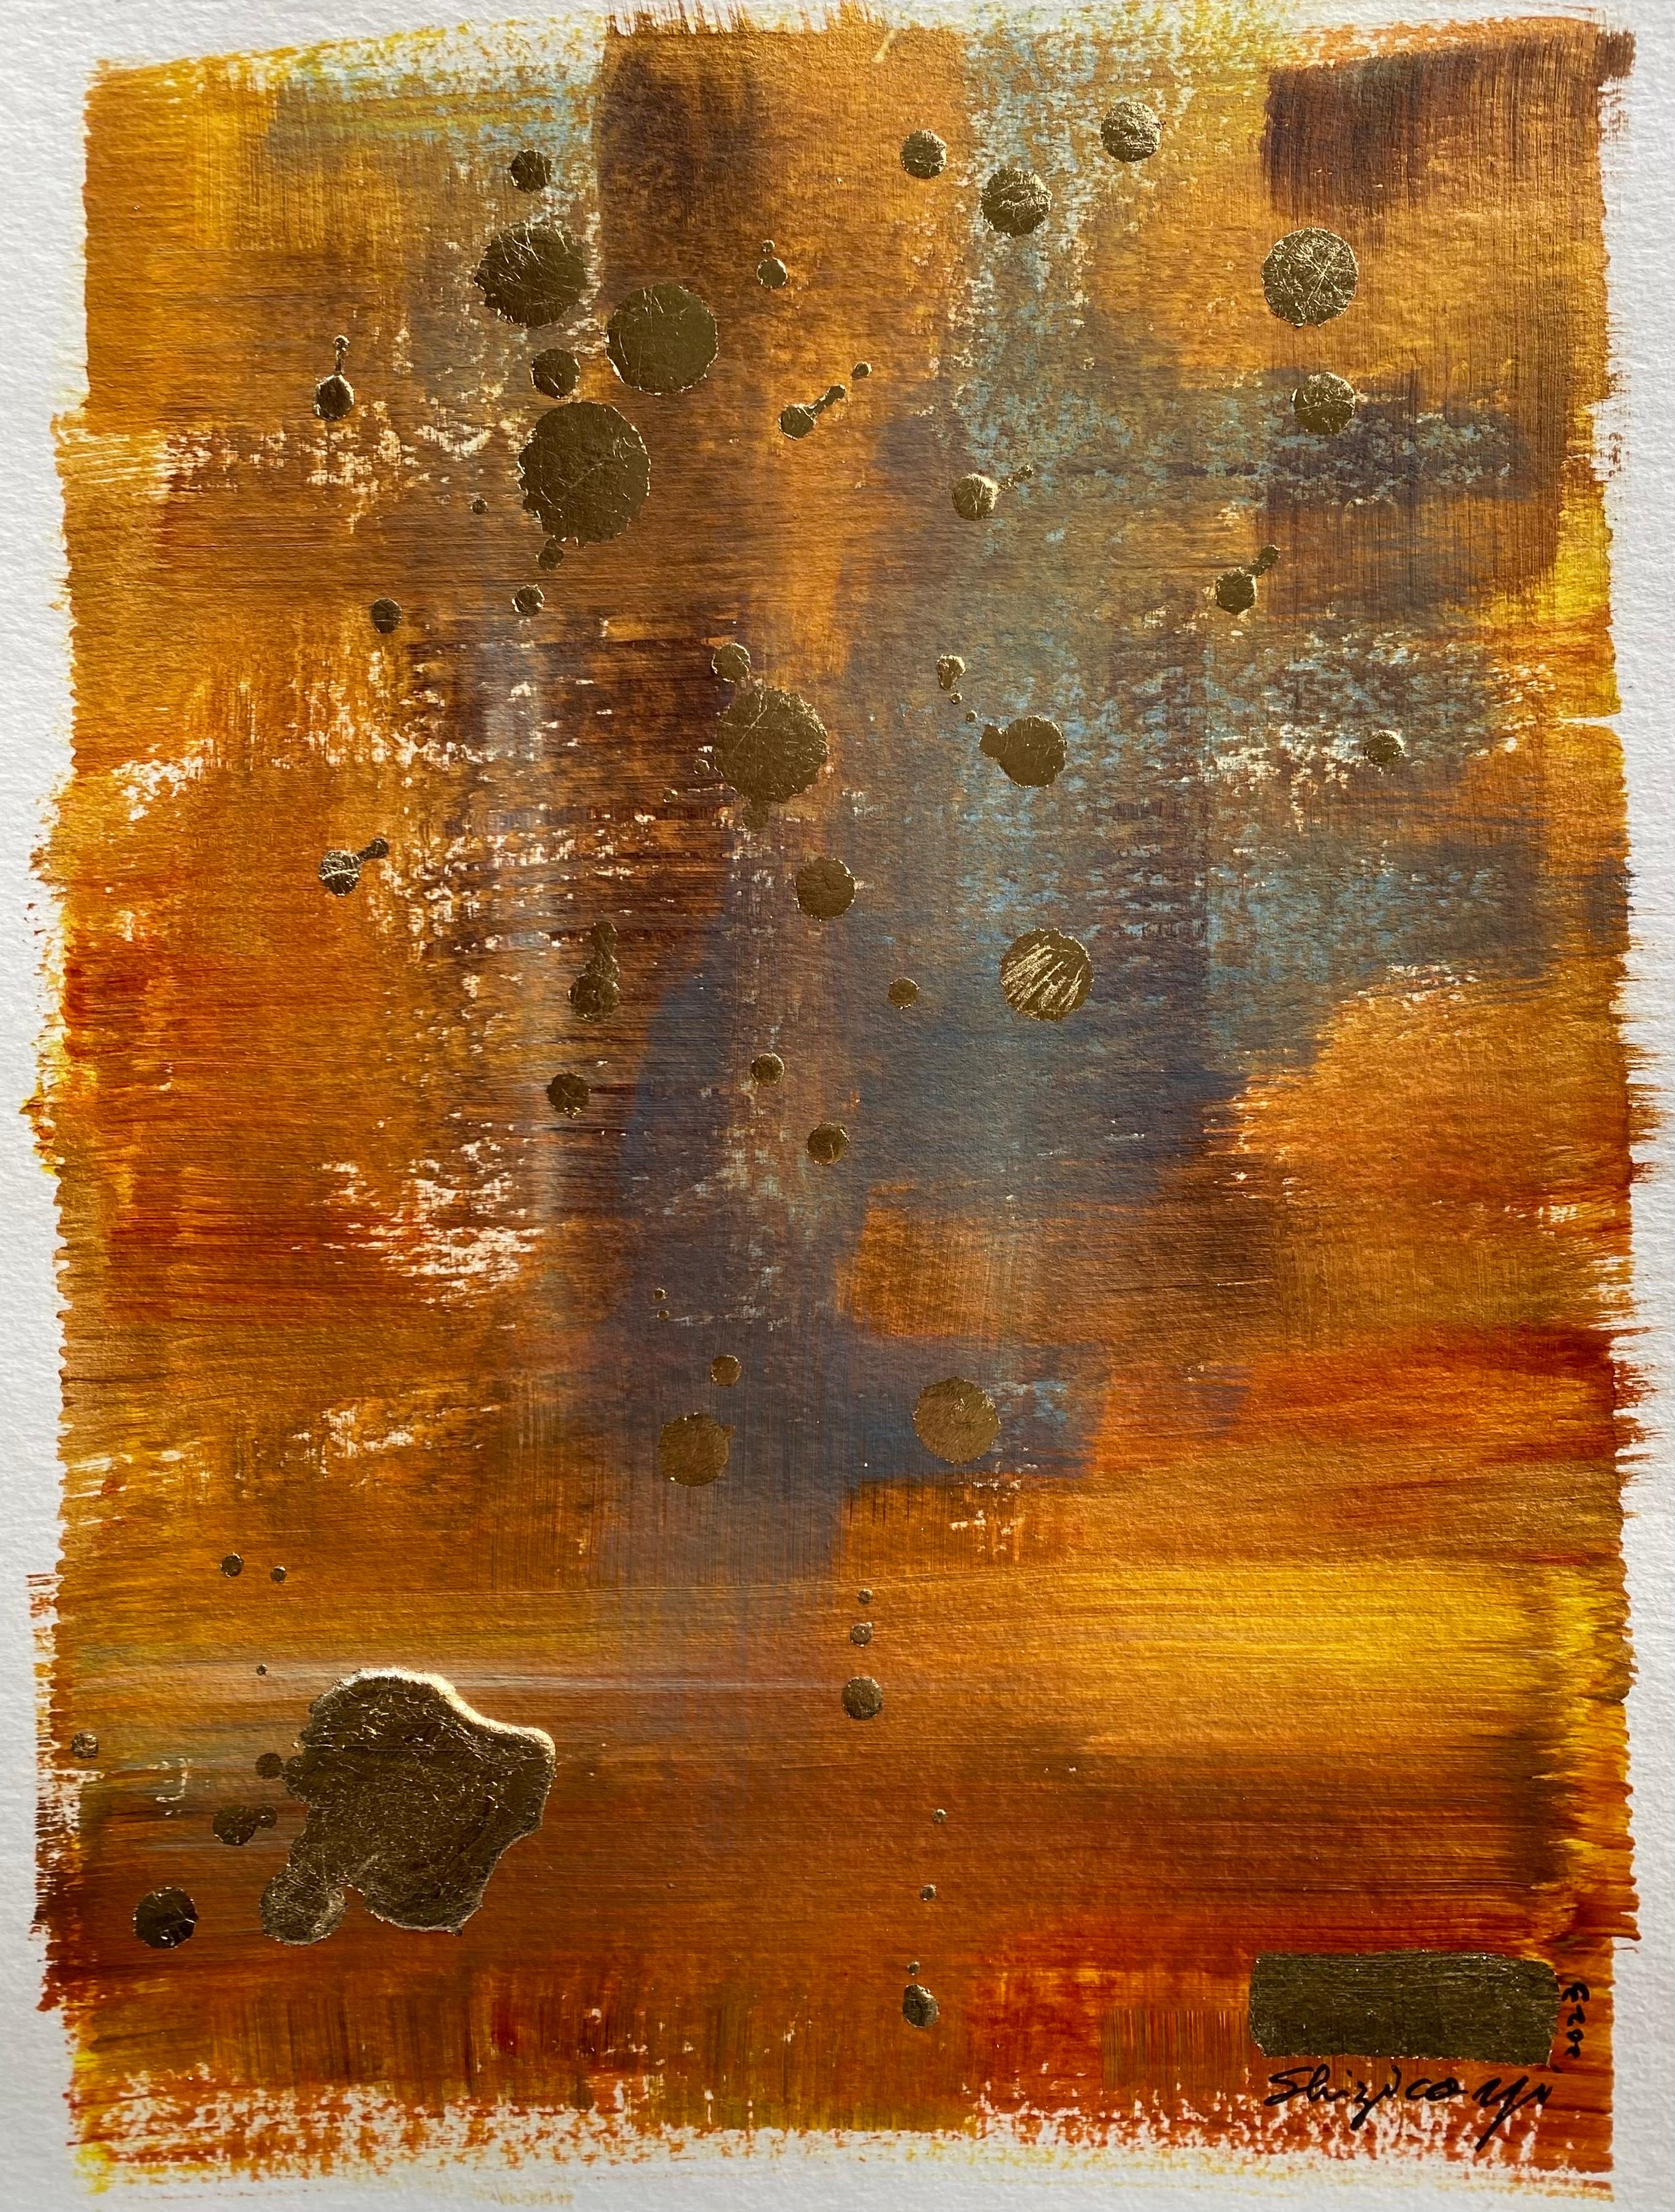 Original-Across the Universe-abstract-gold leaf-UK Awarded Artist-Work on paper 11